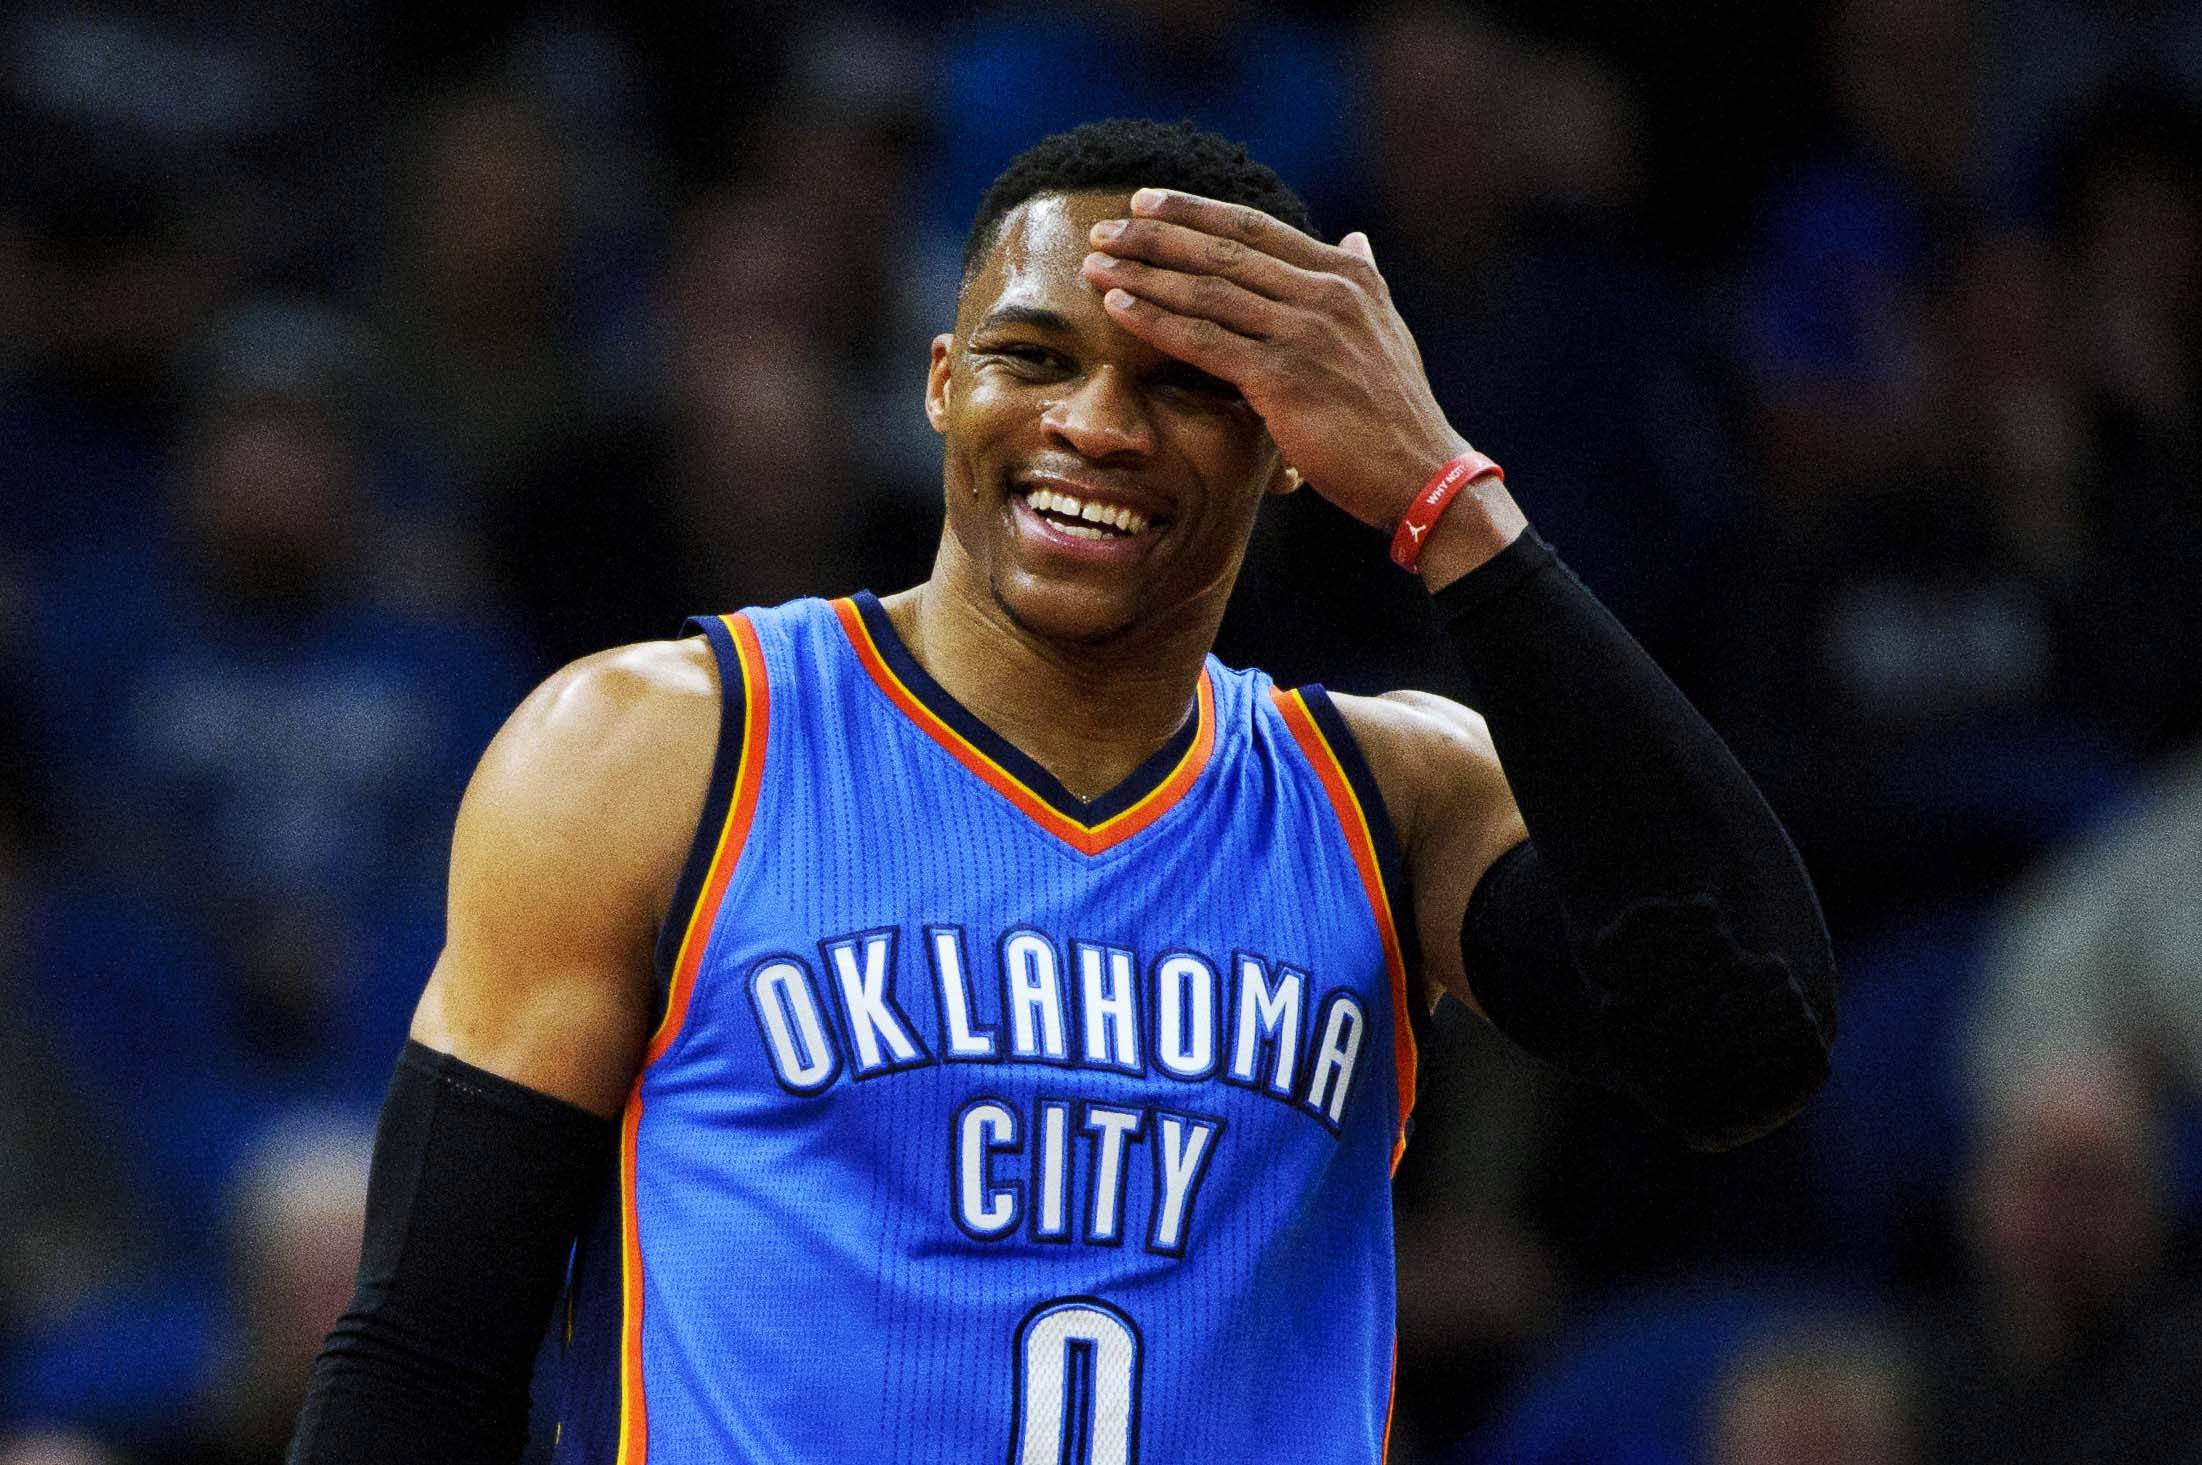 Russell Westbrook will win the NBA MVP award over James Harden